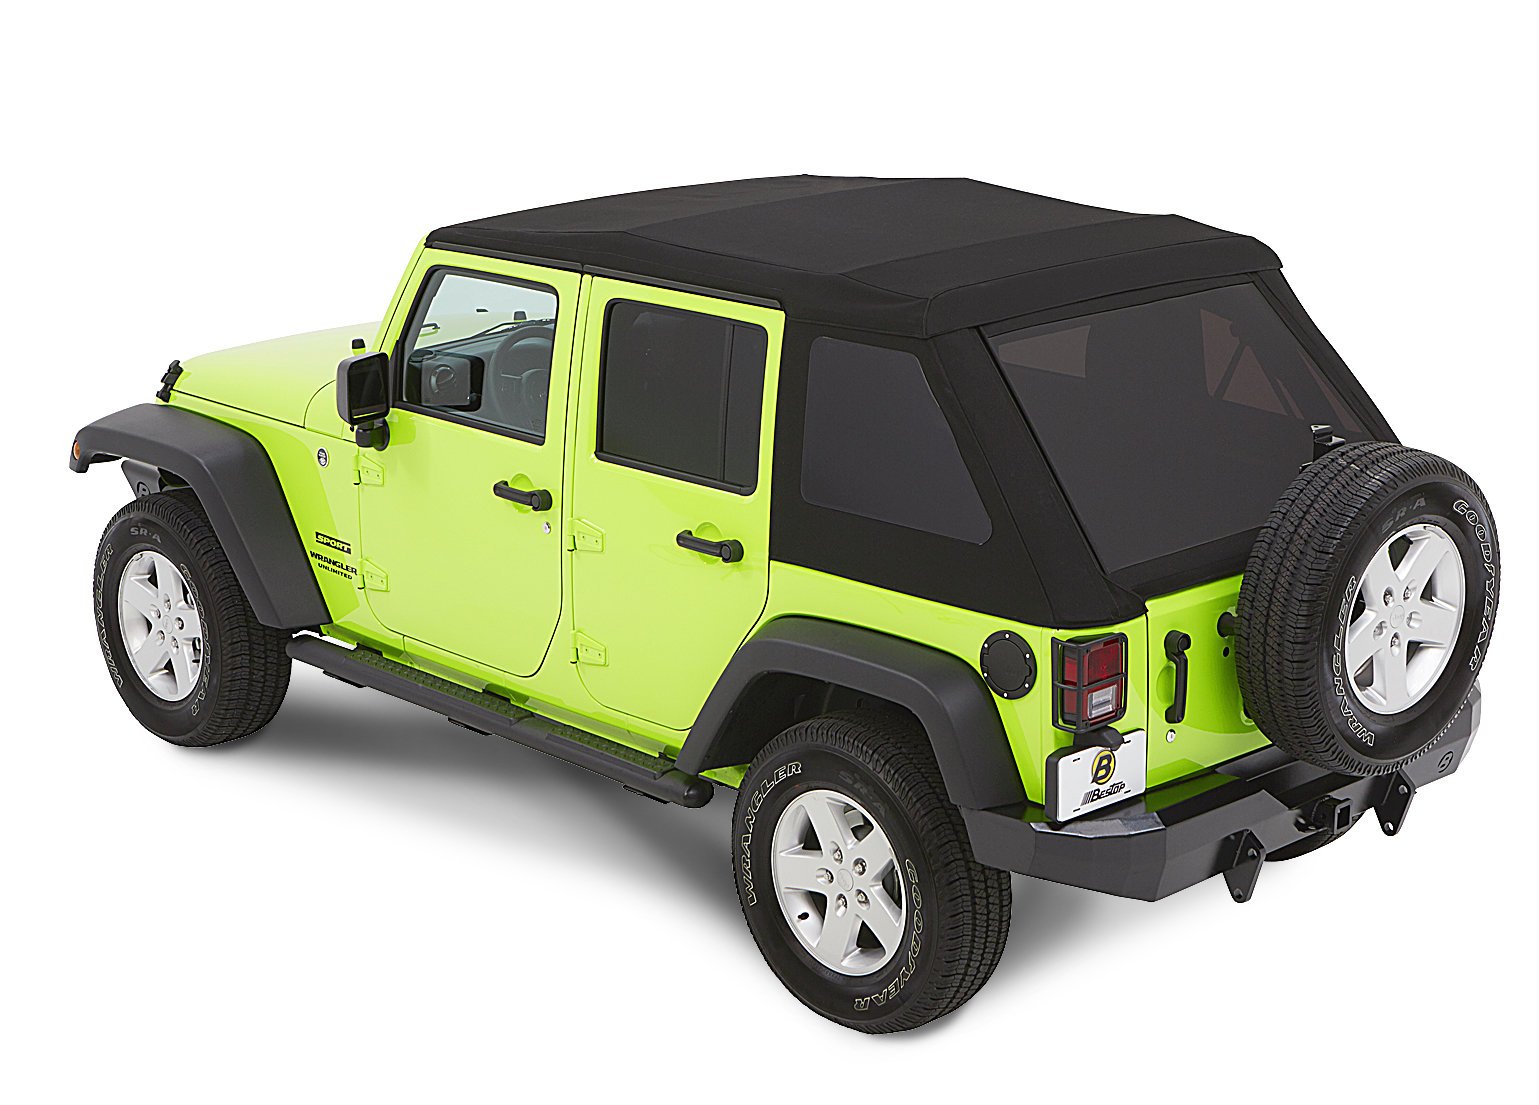 Replace-A-Top™ for Trektop® Hardware - Jeep 2007-18 Wrangler JK; NOTE: For  Trektop hardware